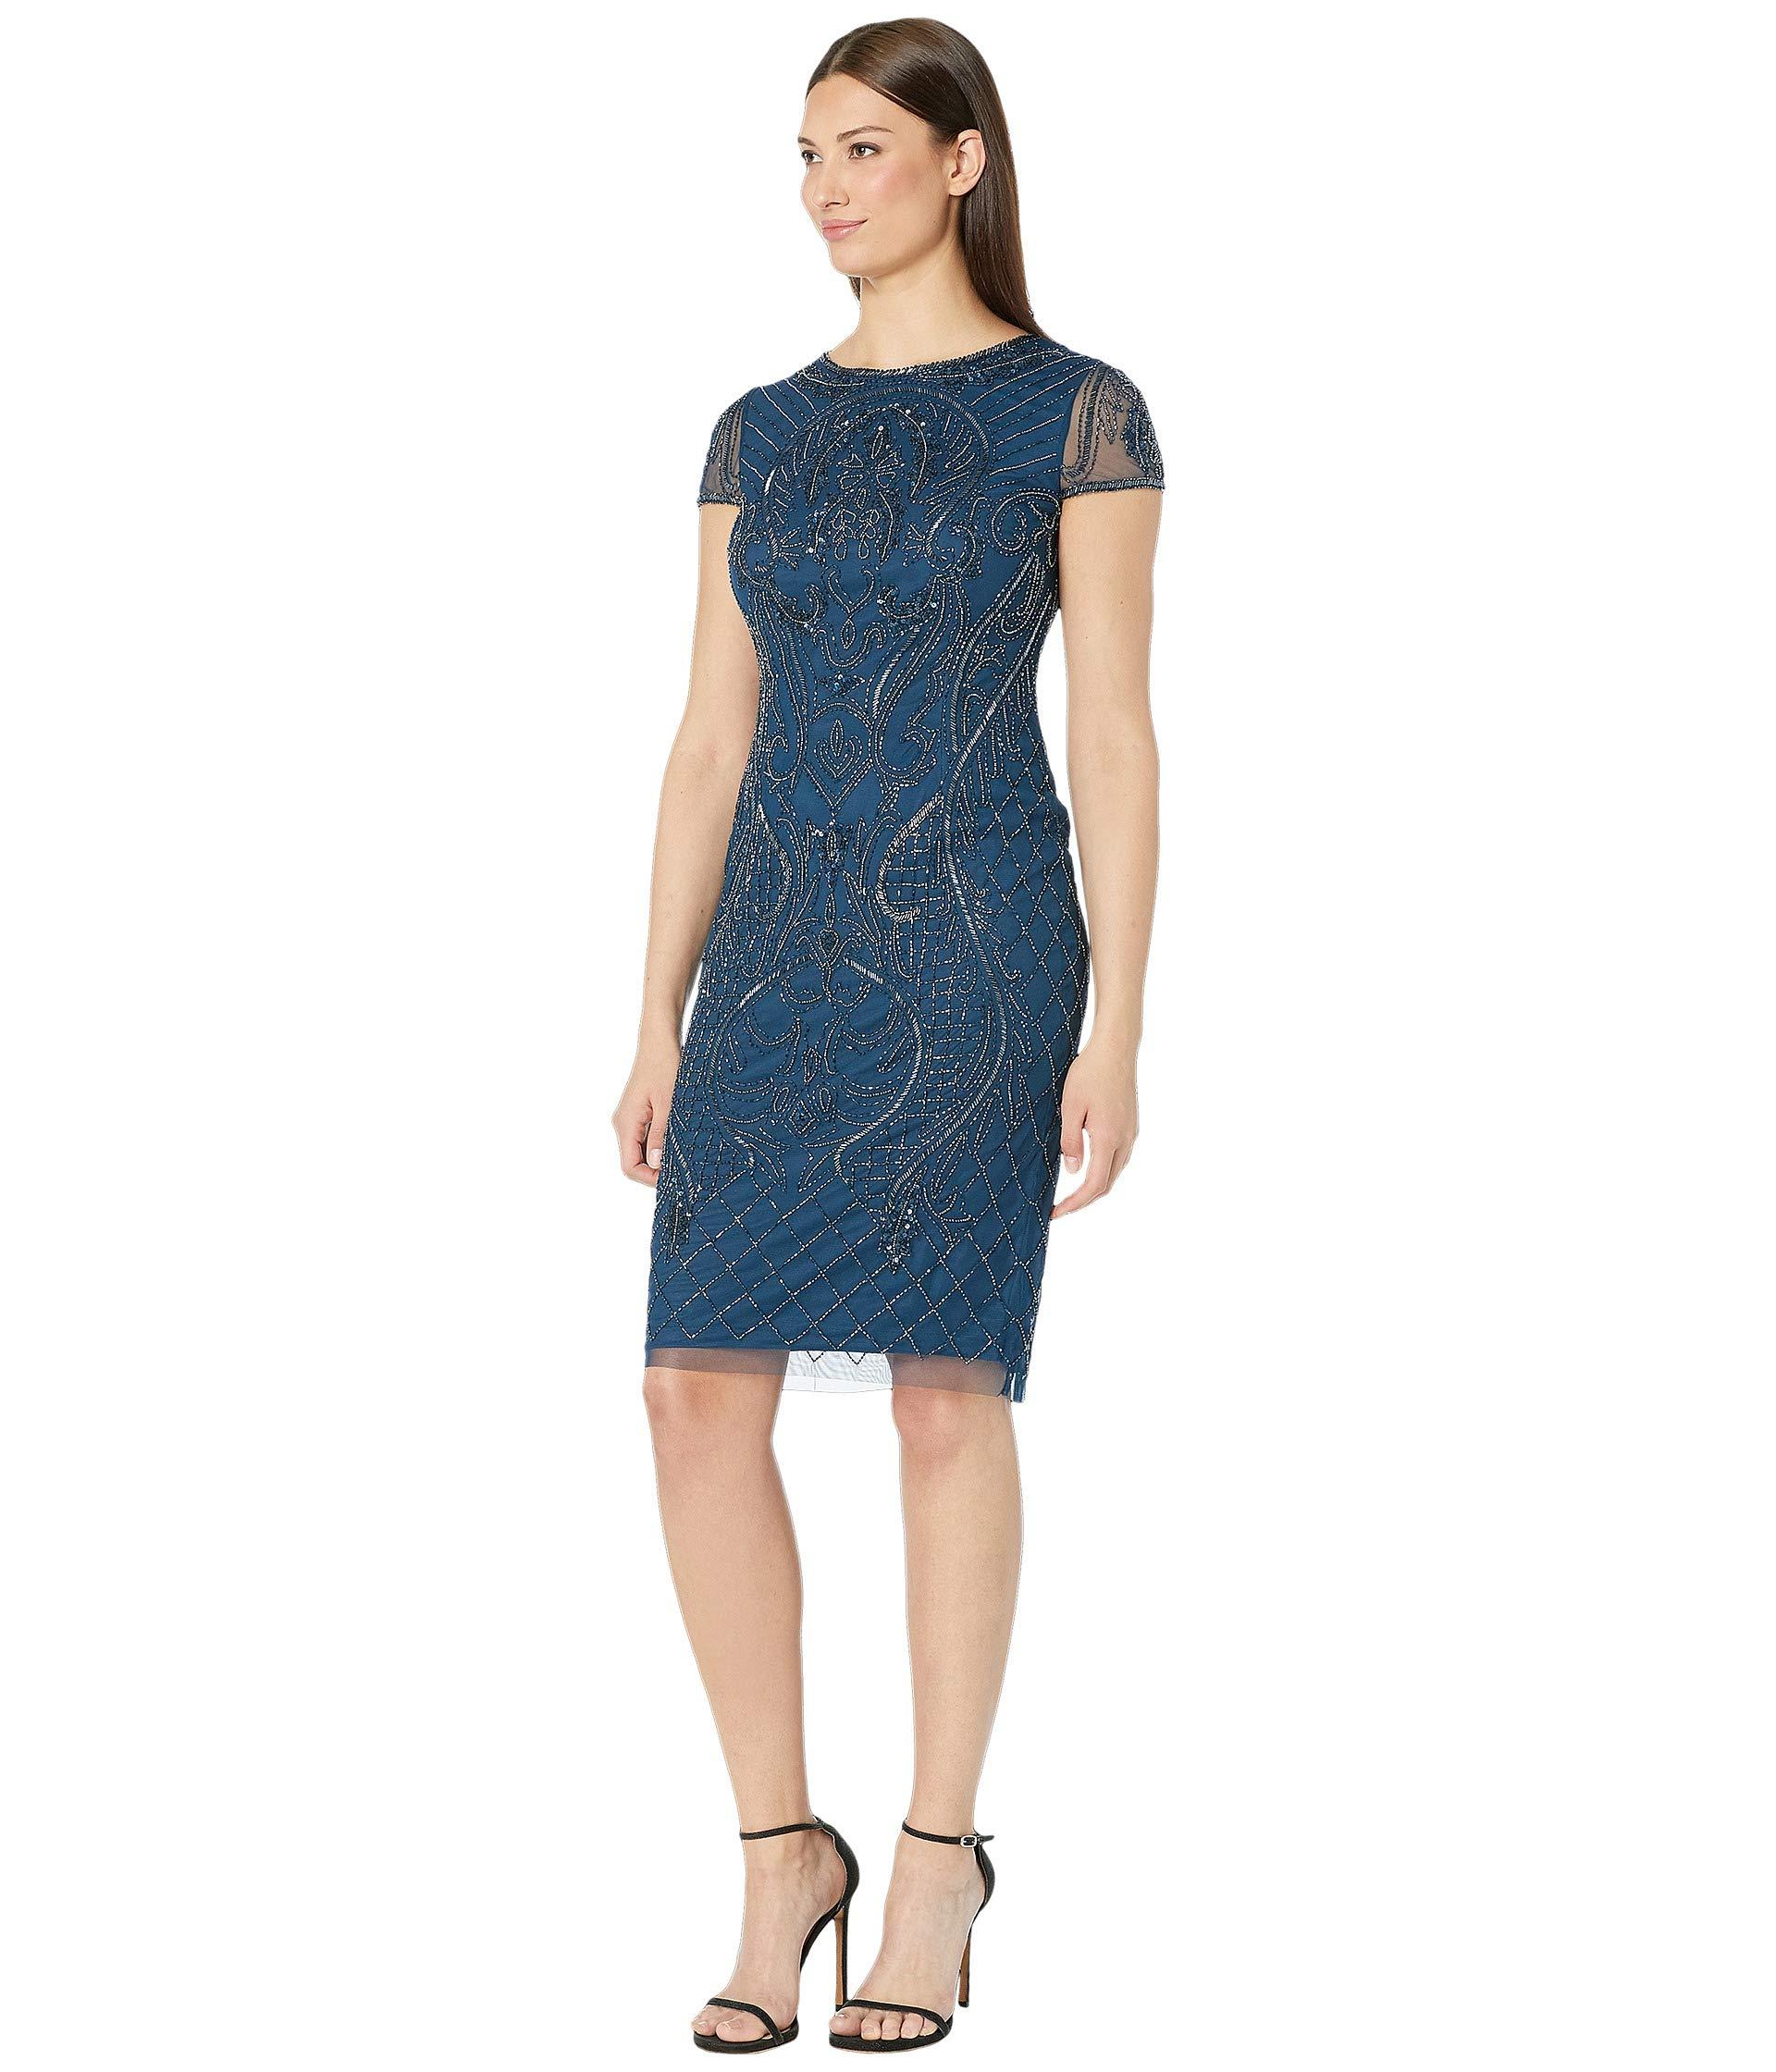 Adrianna Papell Synthetic Short Sleeve Beaded Cocktail Dress in Blue - Lyst